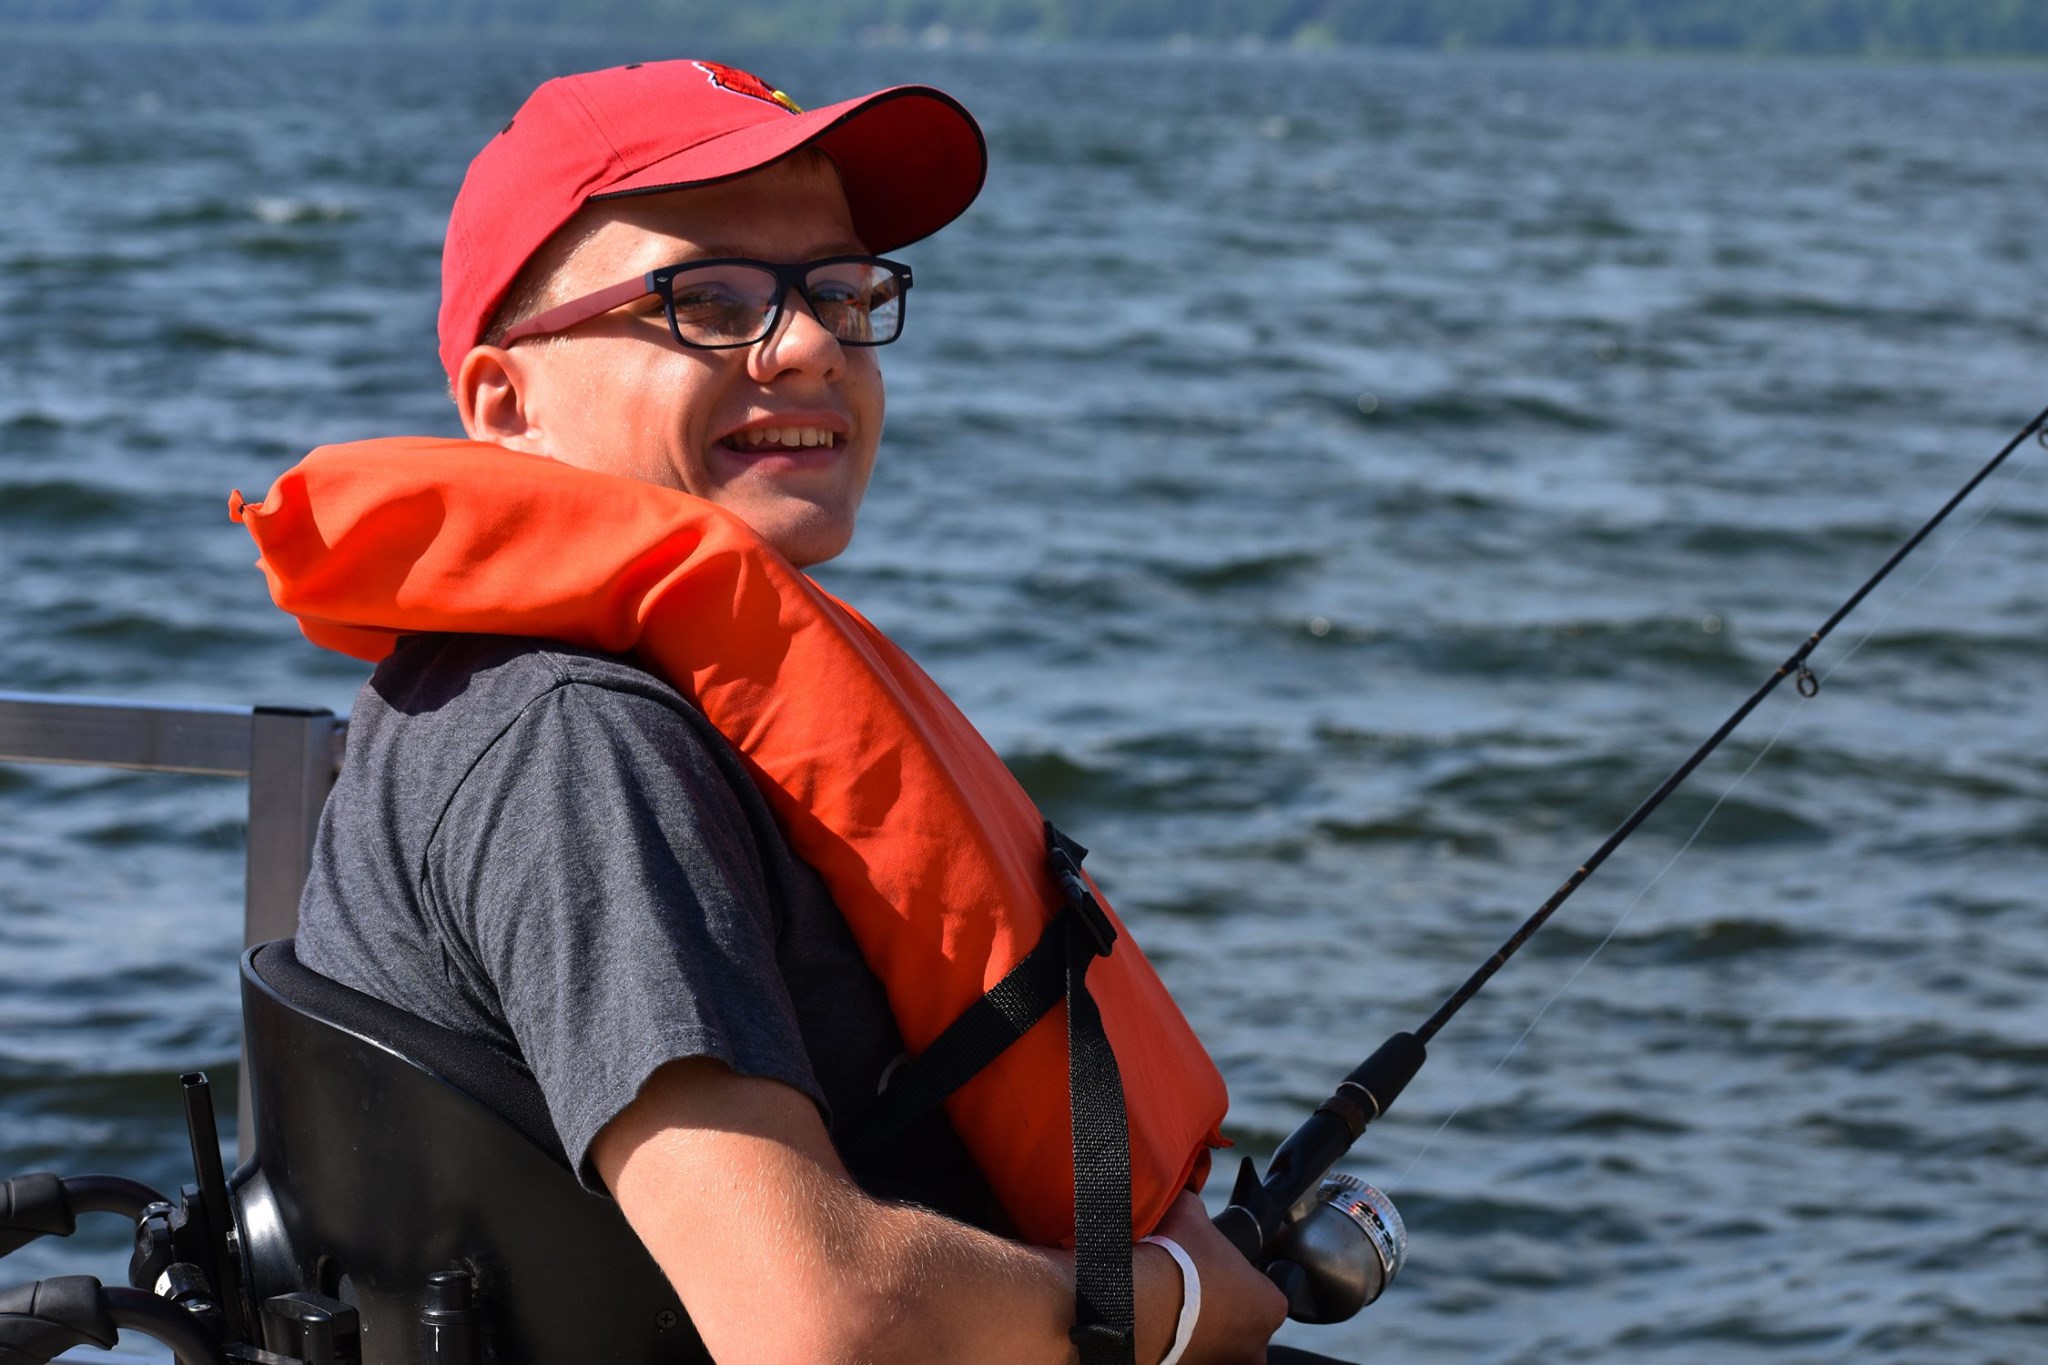 Our camps have accessible fishing piers